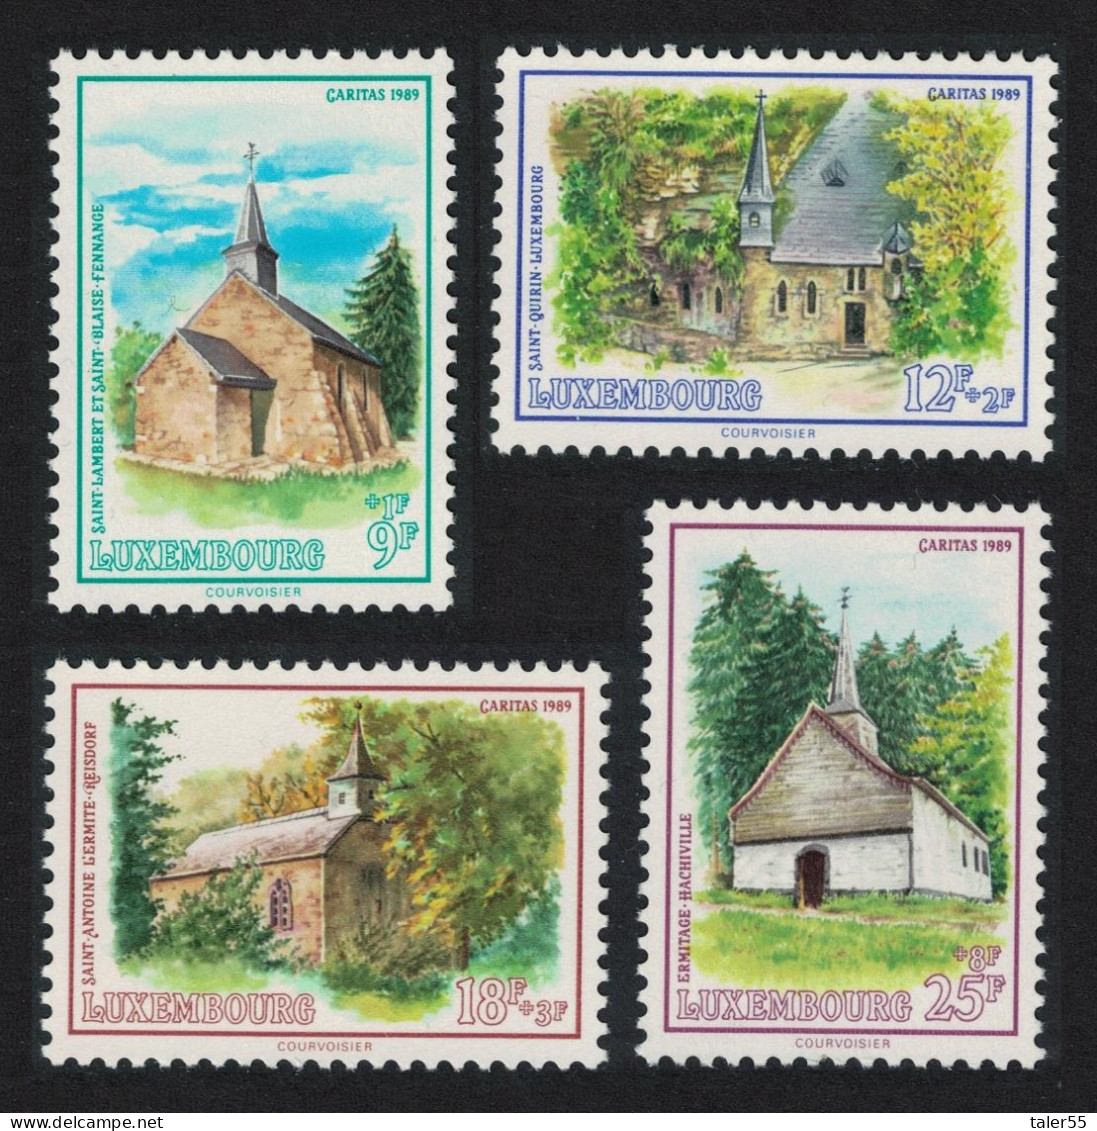 Luxembourg Restored Chapels 4v 1989 MNH SG#1259-1262 MI#1232-1235 - Unused Stamps